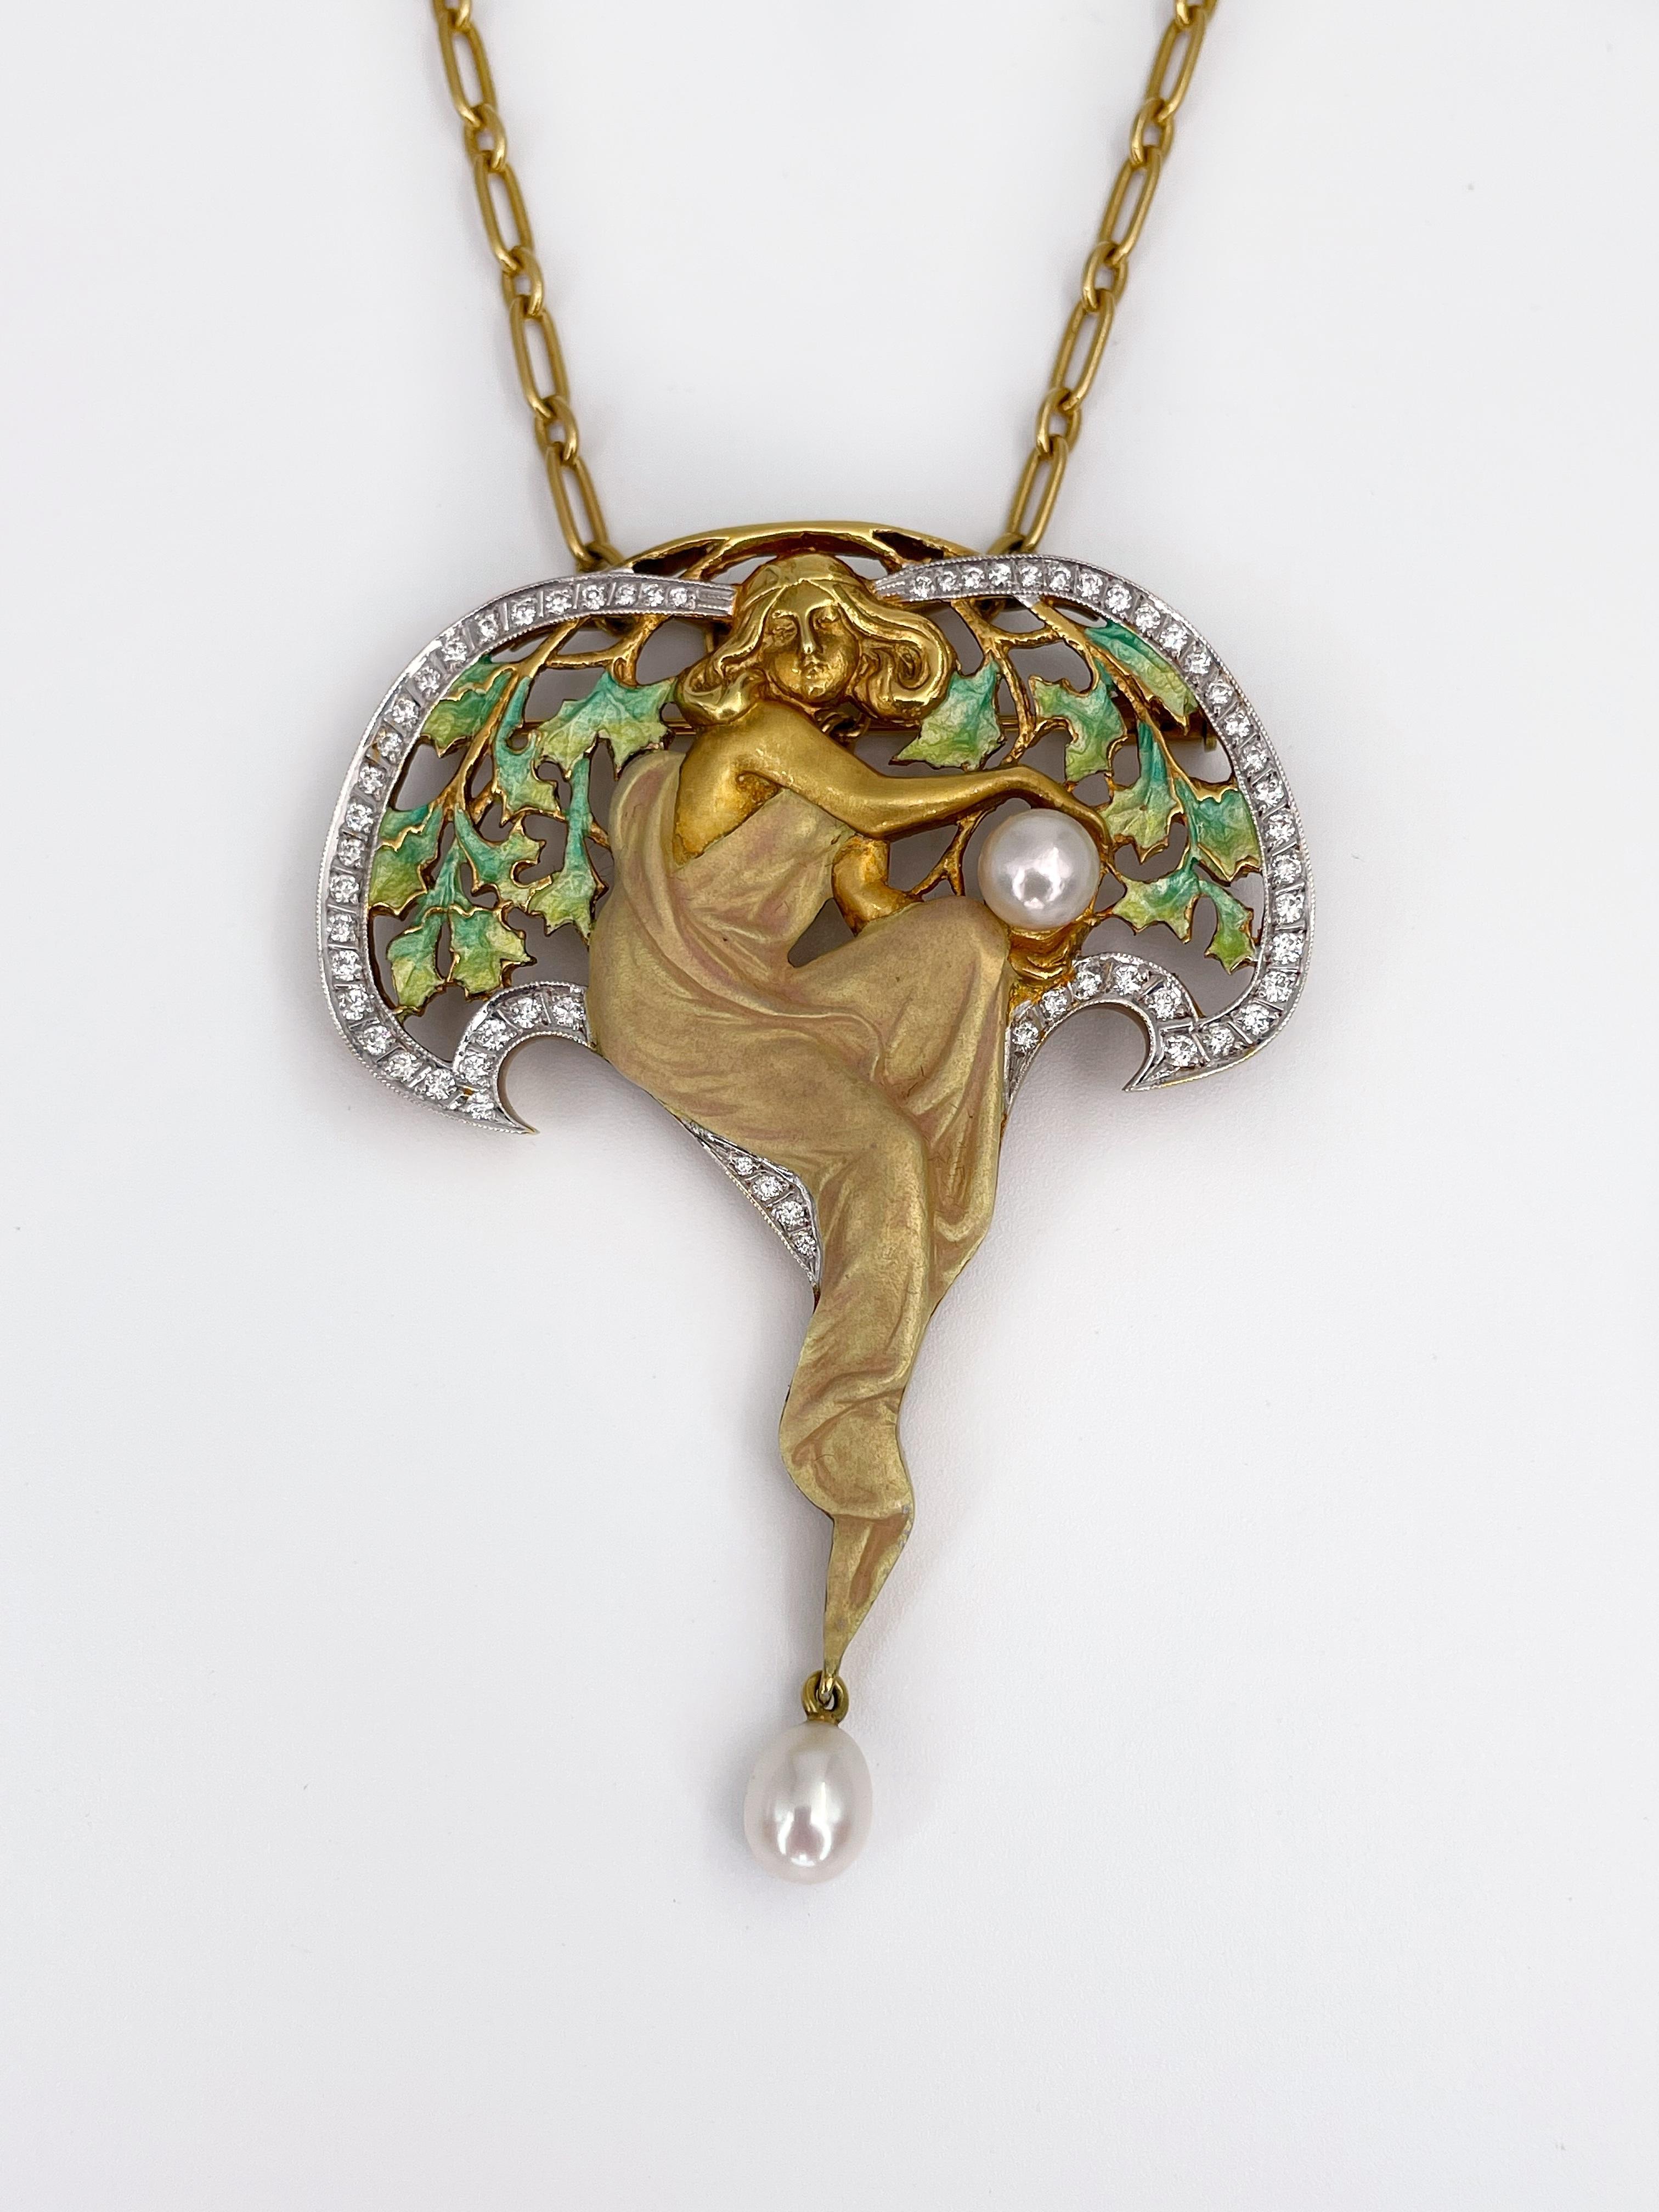 This is a breathtaking Art Nouveau style lavalier pendant-brooch designed by Masriera. It depicts a nymph framed by floral motifs. 

The piece is crafted in 18K yellow gold. It features 58 round brilliant cut diamonds and 2 cultured pearls. Pendant